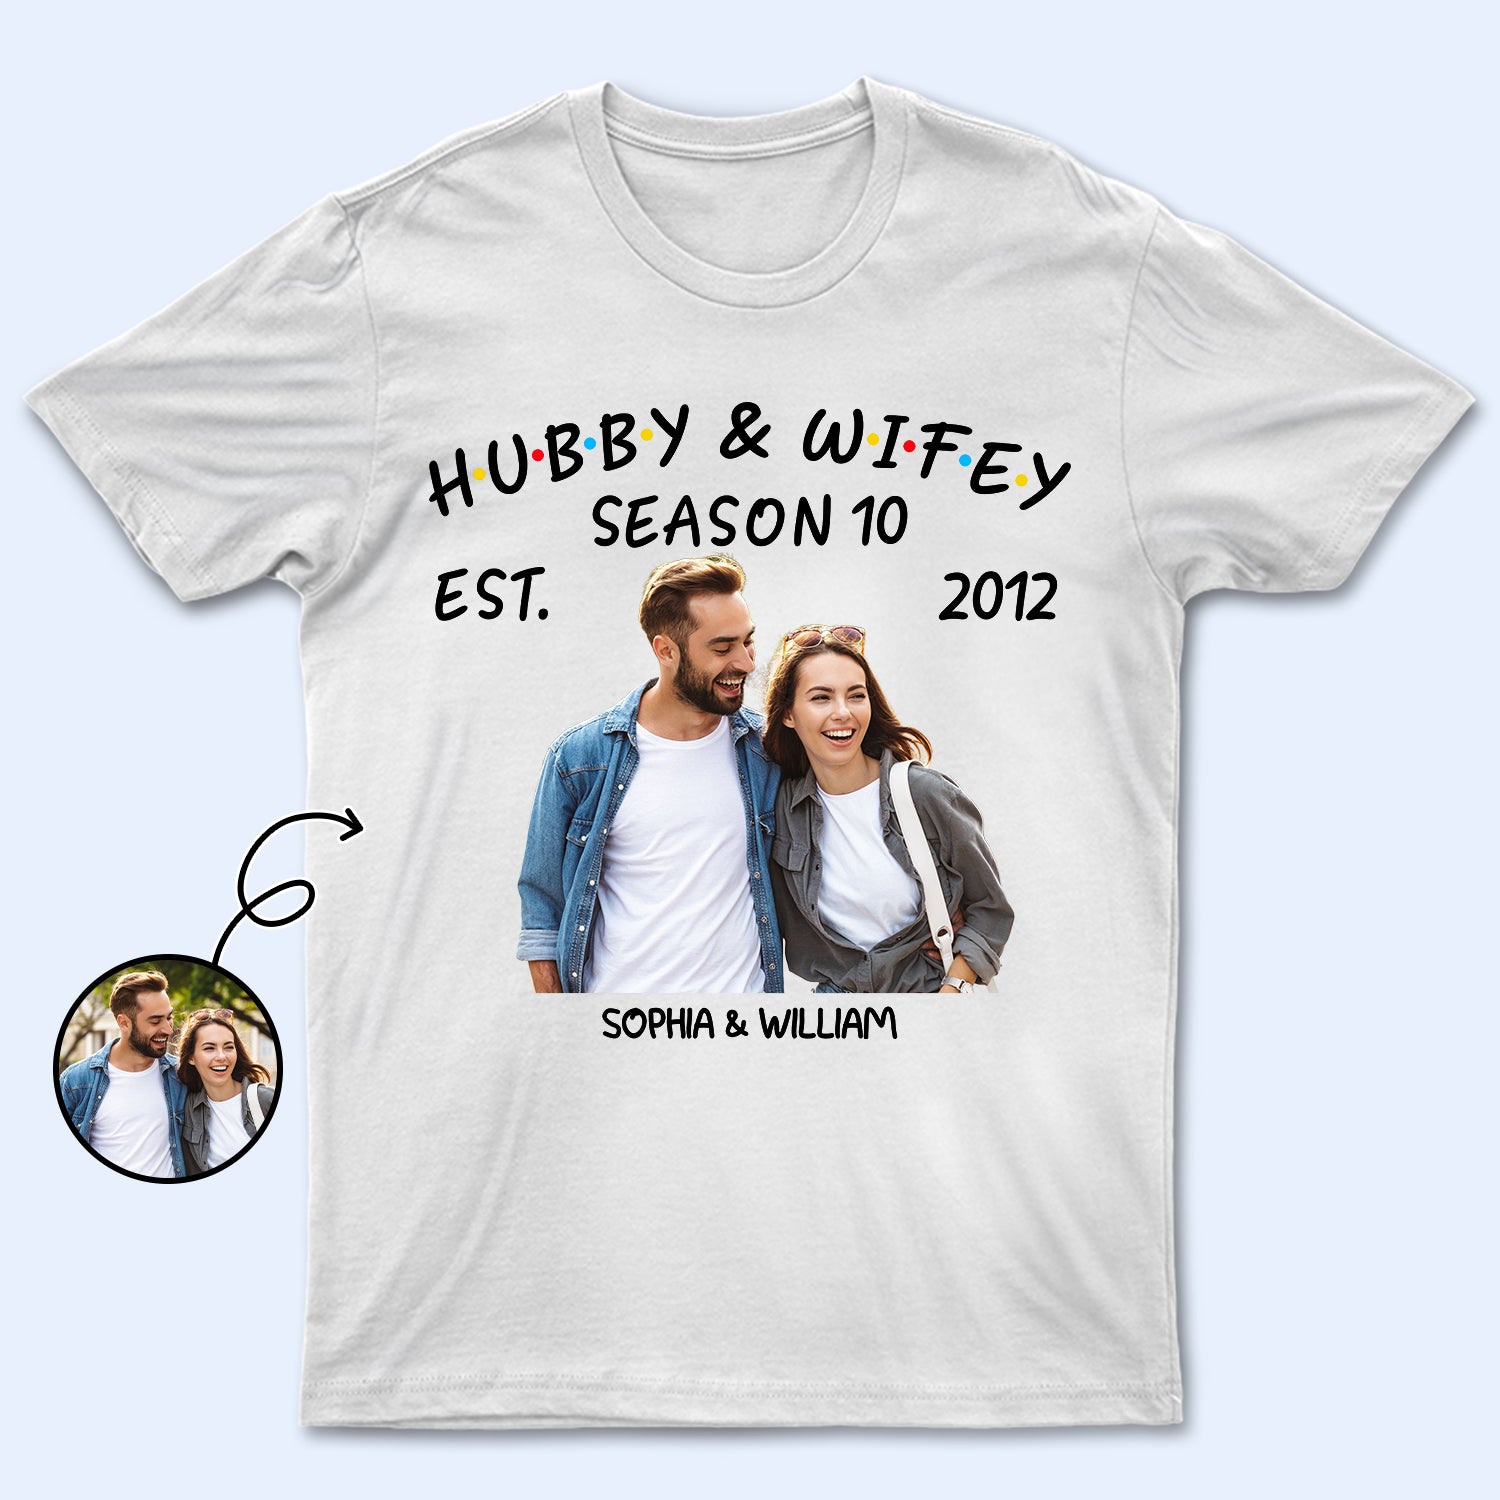 Custom Photo Hubby And Wifey Seasons - Birthday, Anniversary Gift For Spouse, Husband, Wife, Couple - Personalized T Shirt